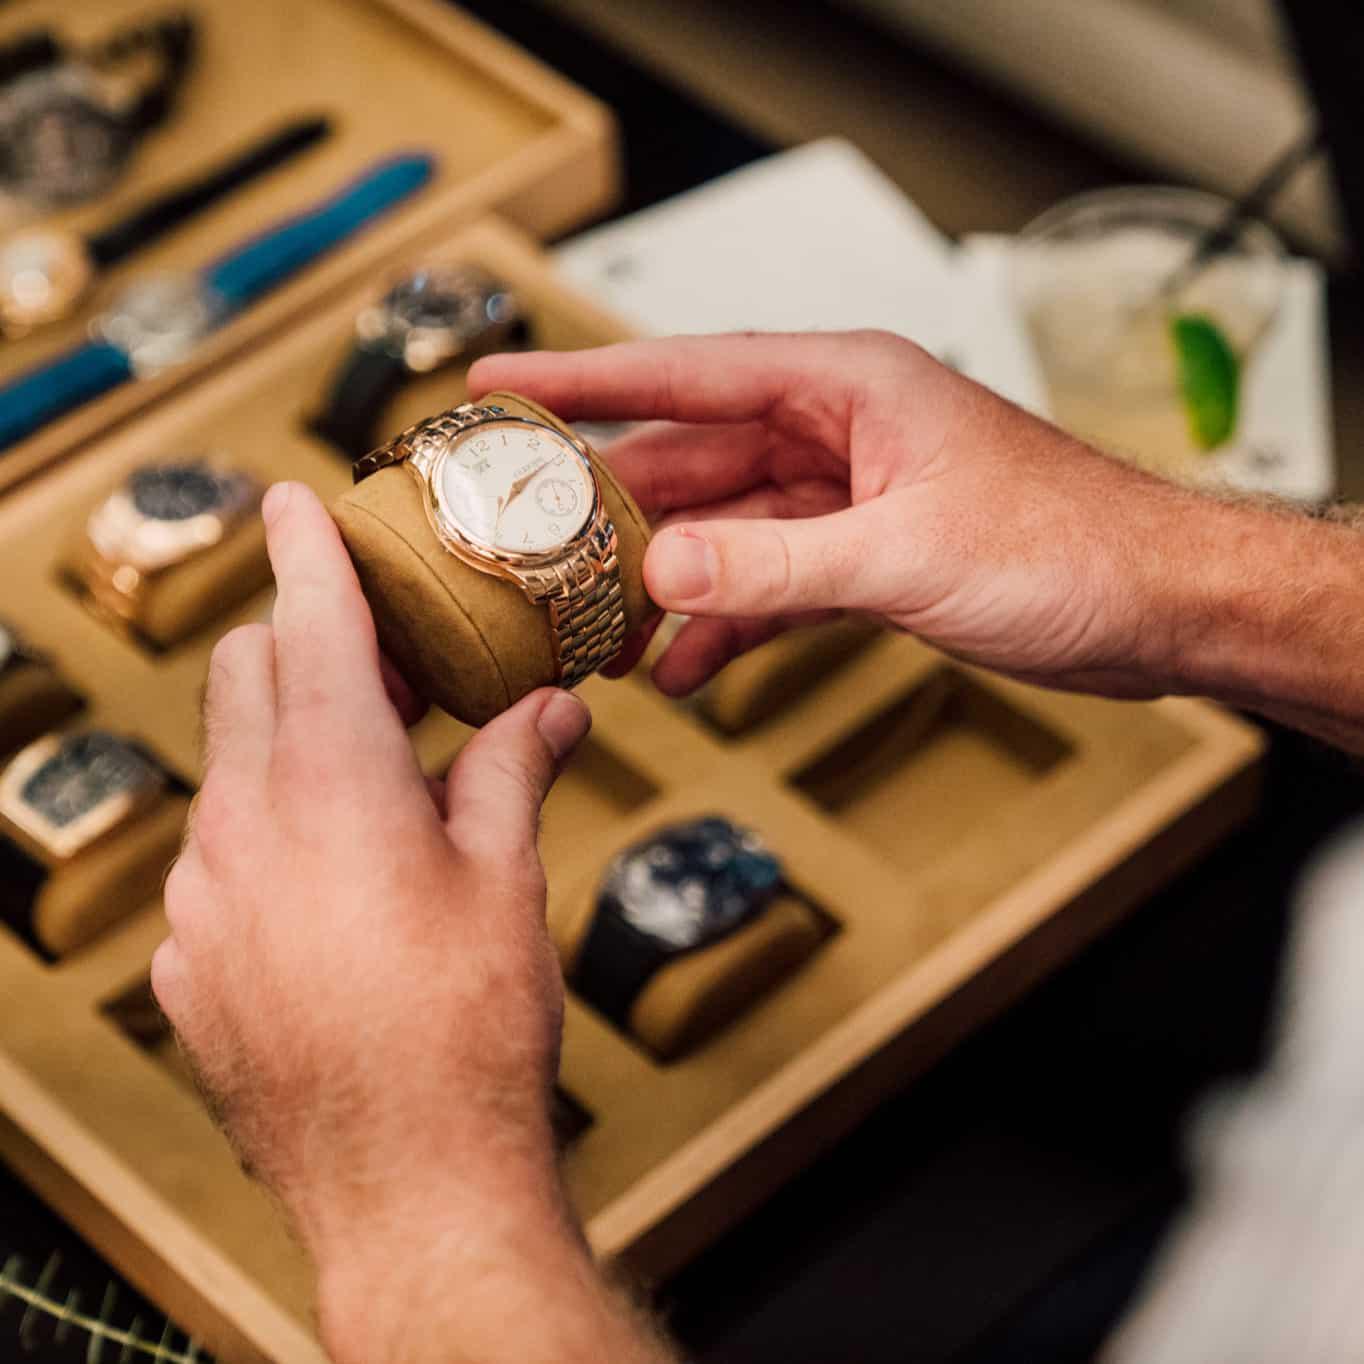 selecting a watch from a watch box